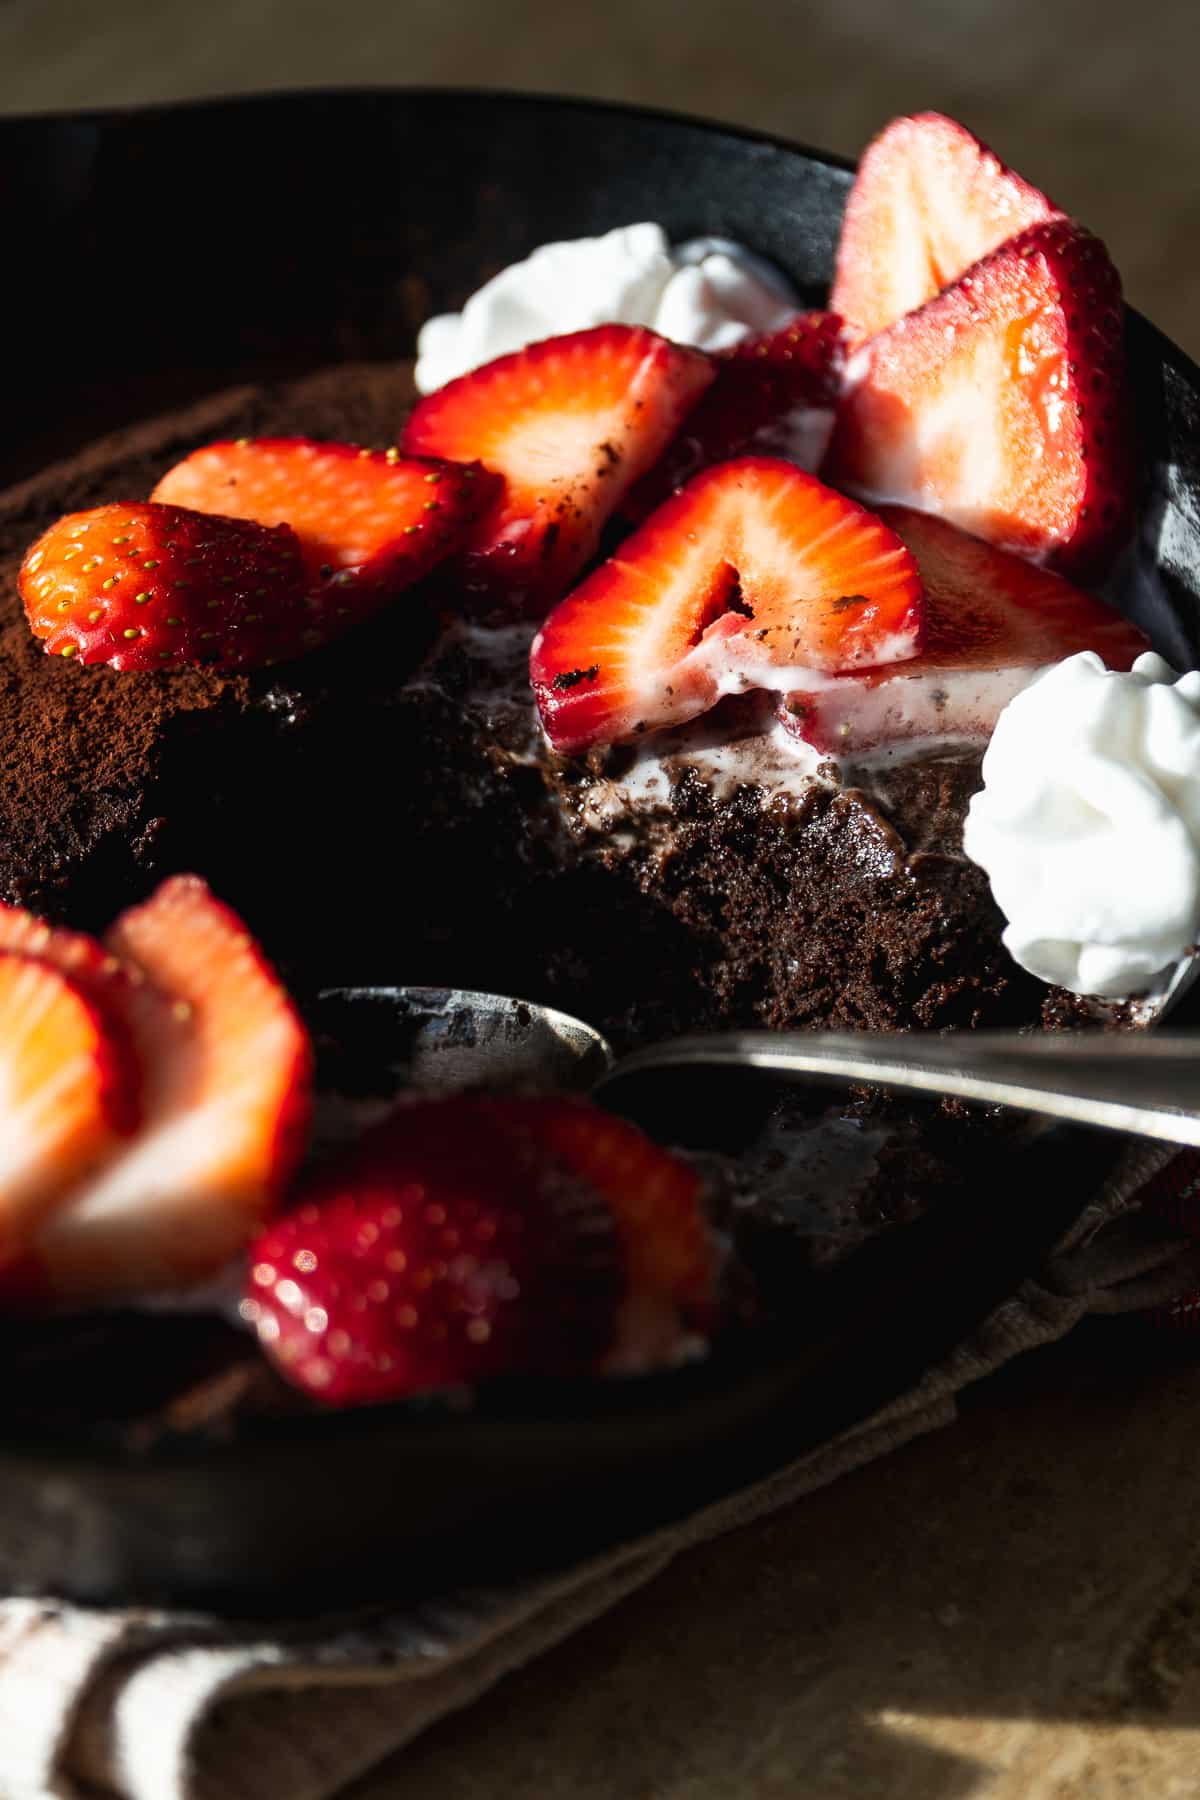 Chocolate cake in a cast iron skillet with coconut whipped cream and strawberries.